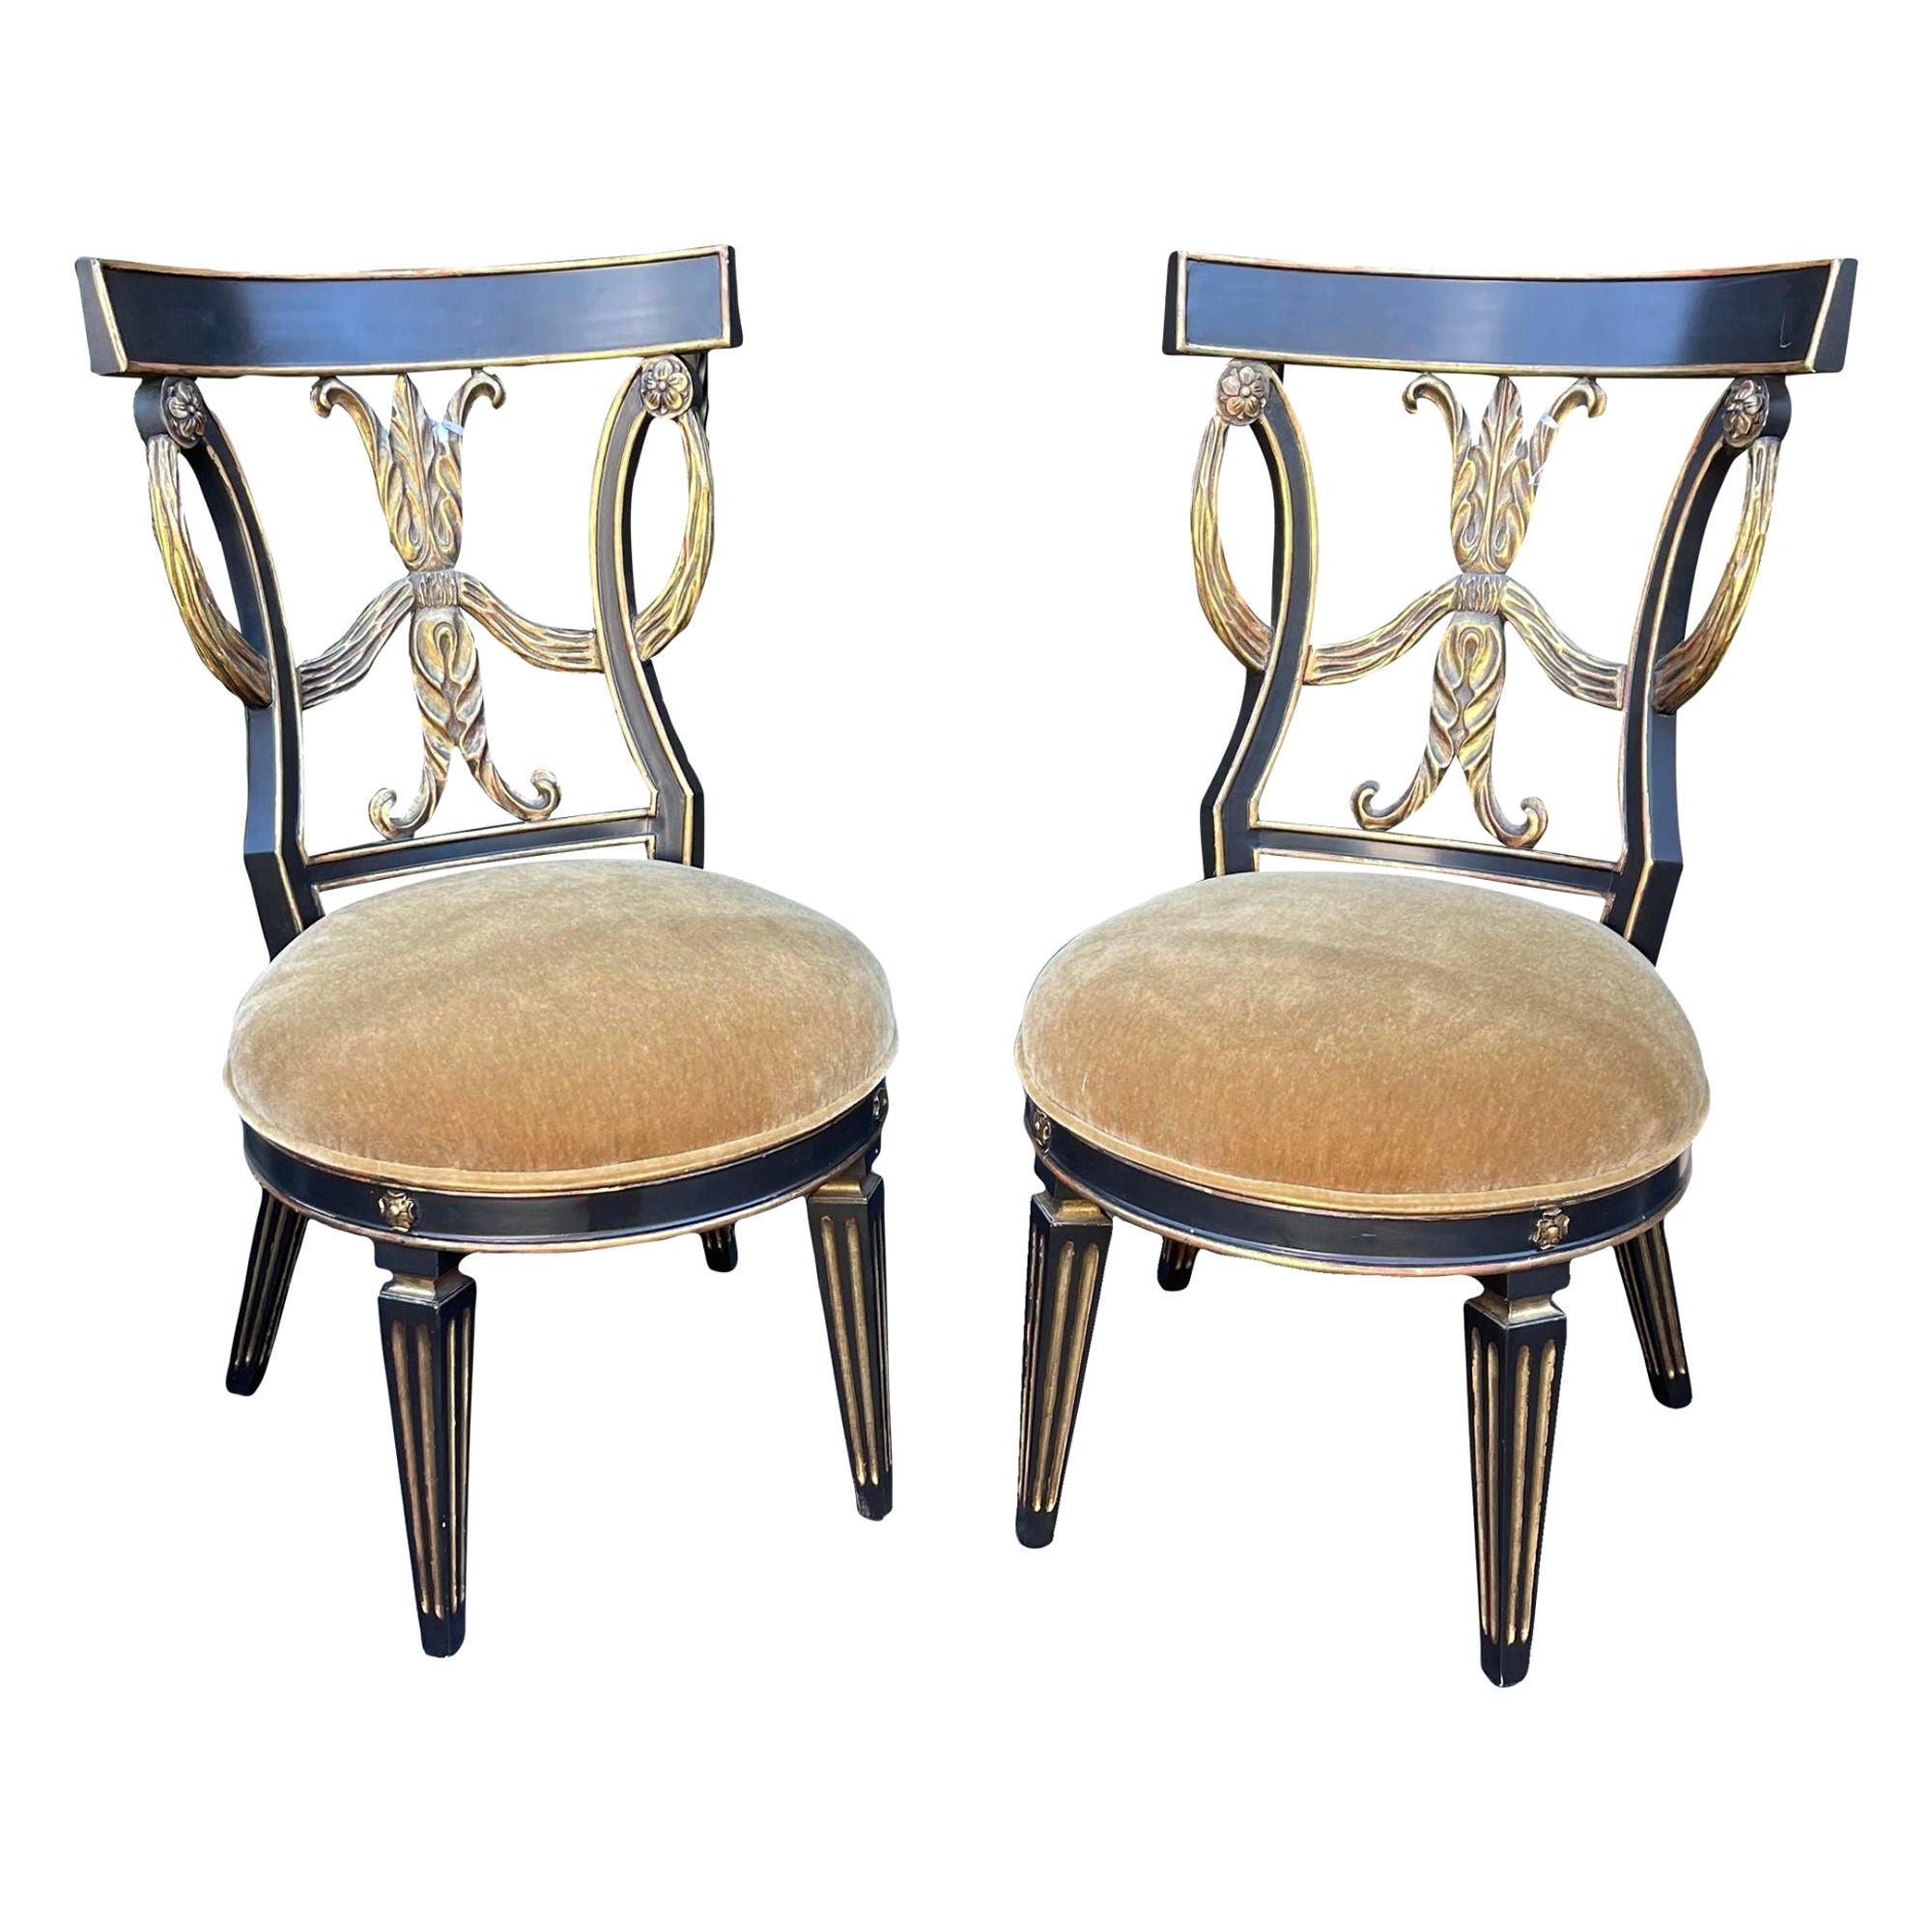 Pair of Regency Style Giltwood & Mohair Chairs by Randy Esada Designs for Prospr For Sale